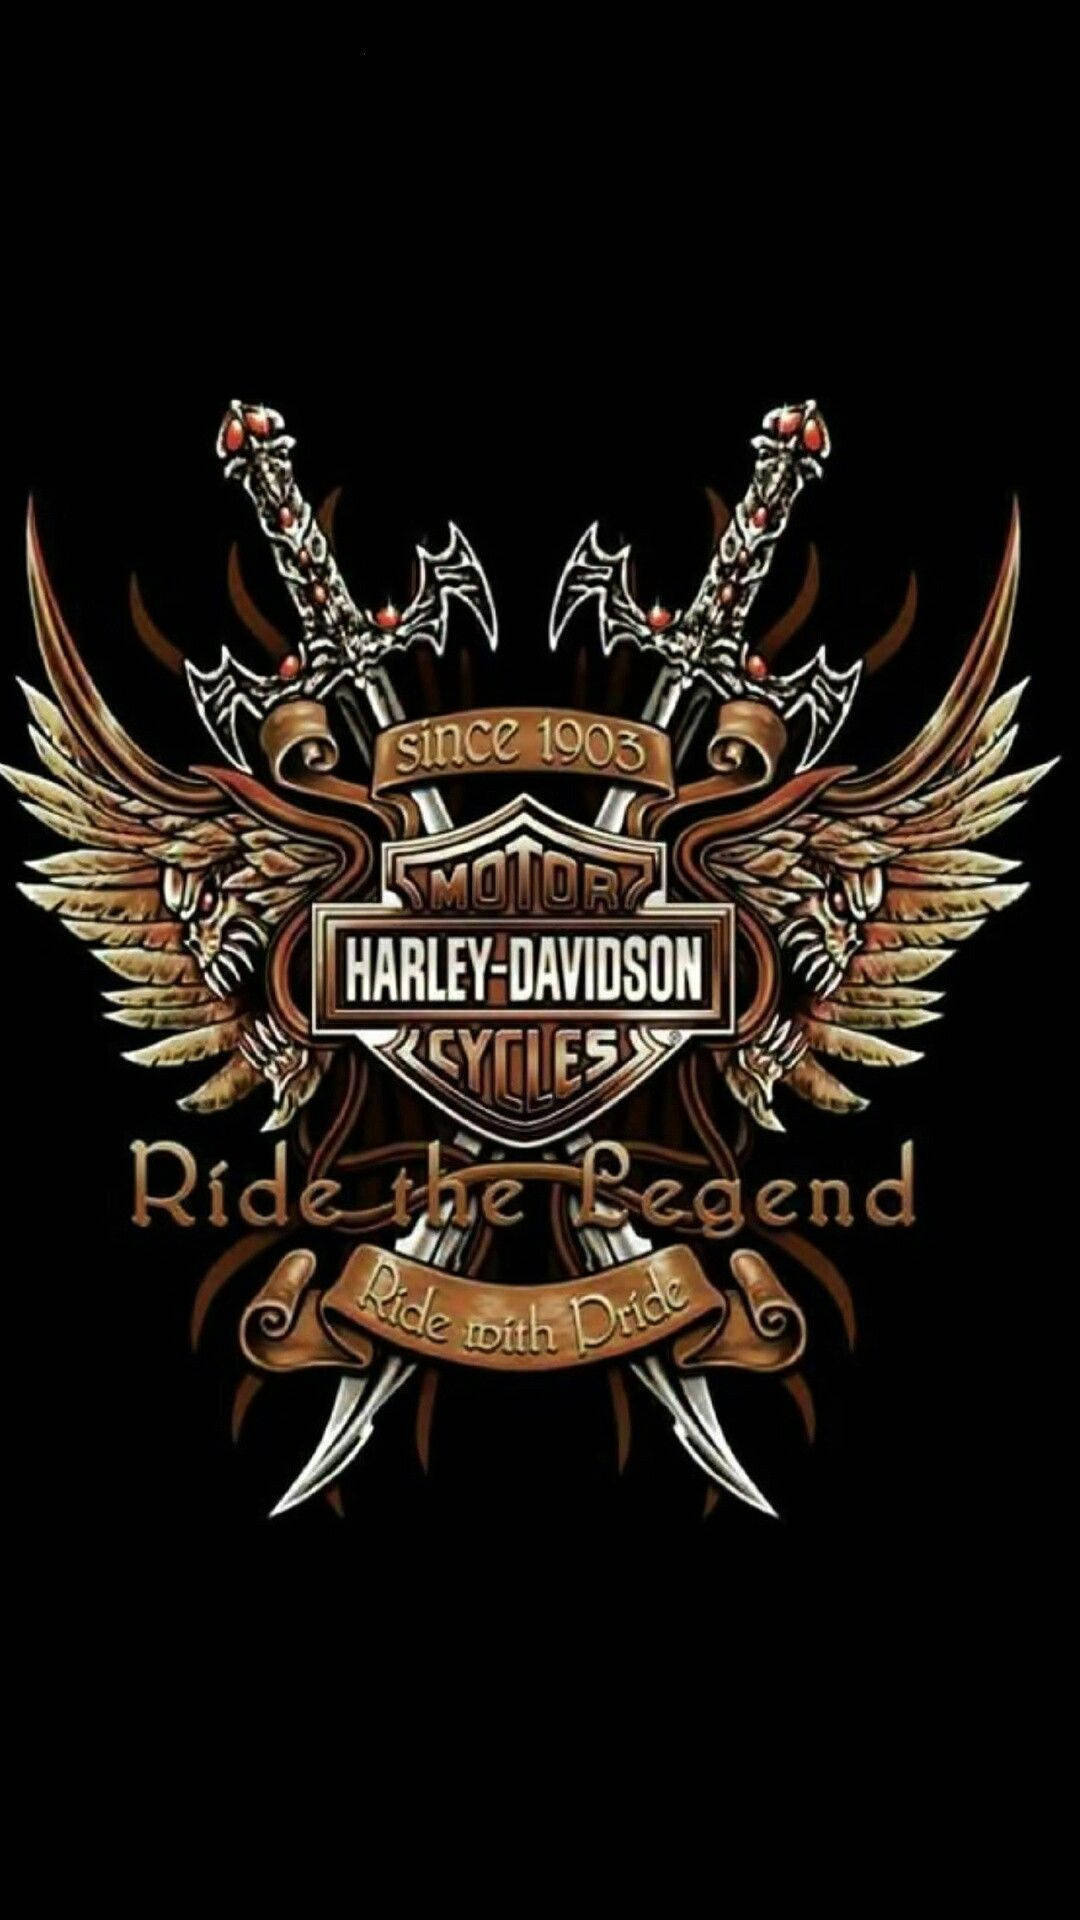 Experience Freedom with Harley Davidson Logo Wallpaper